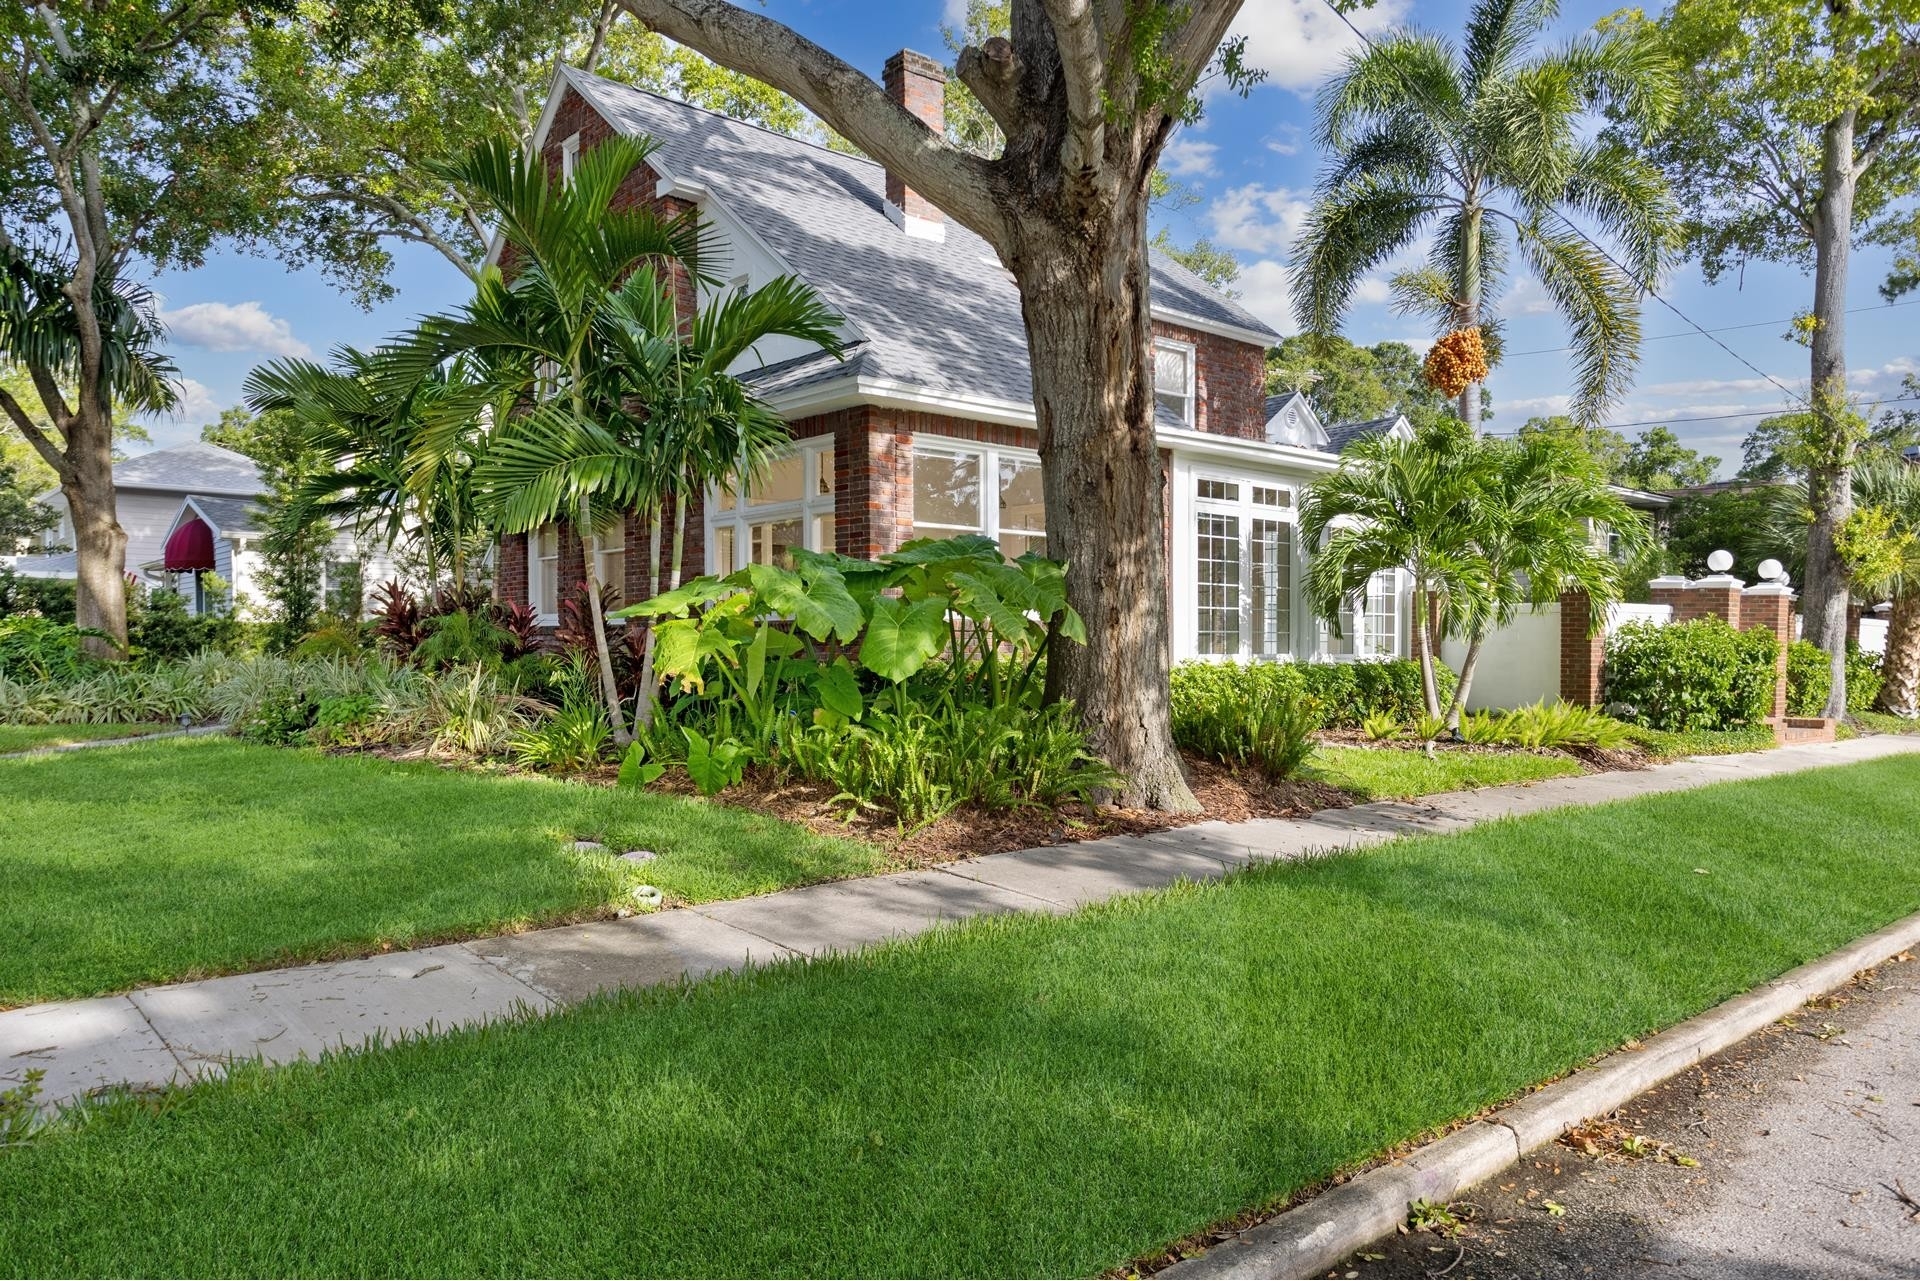 3. Single Family Homes for Sale at Historic Old Northeast, St. Petersburg, FL 33704